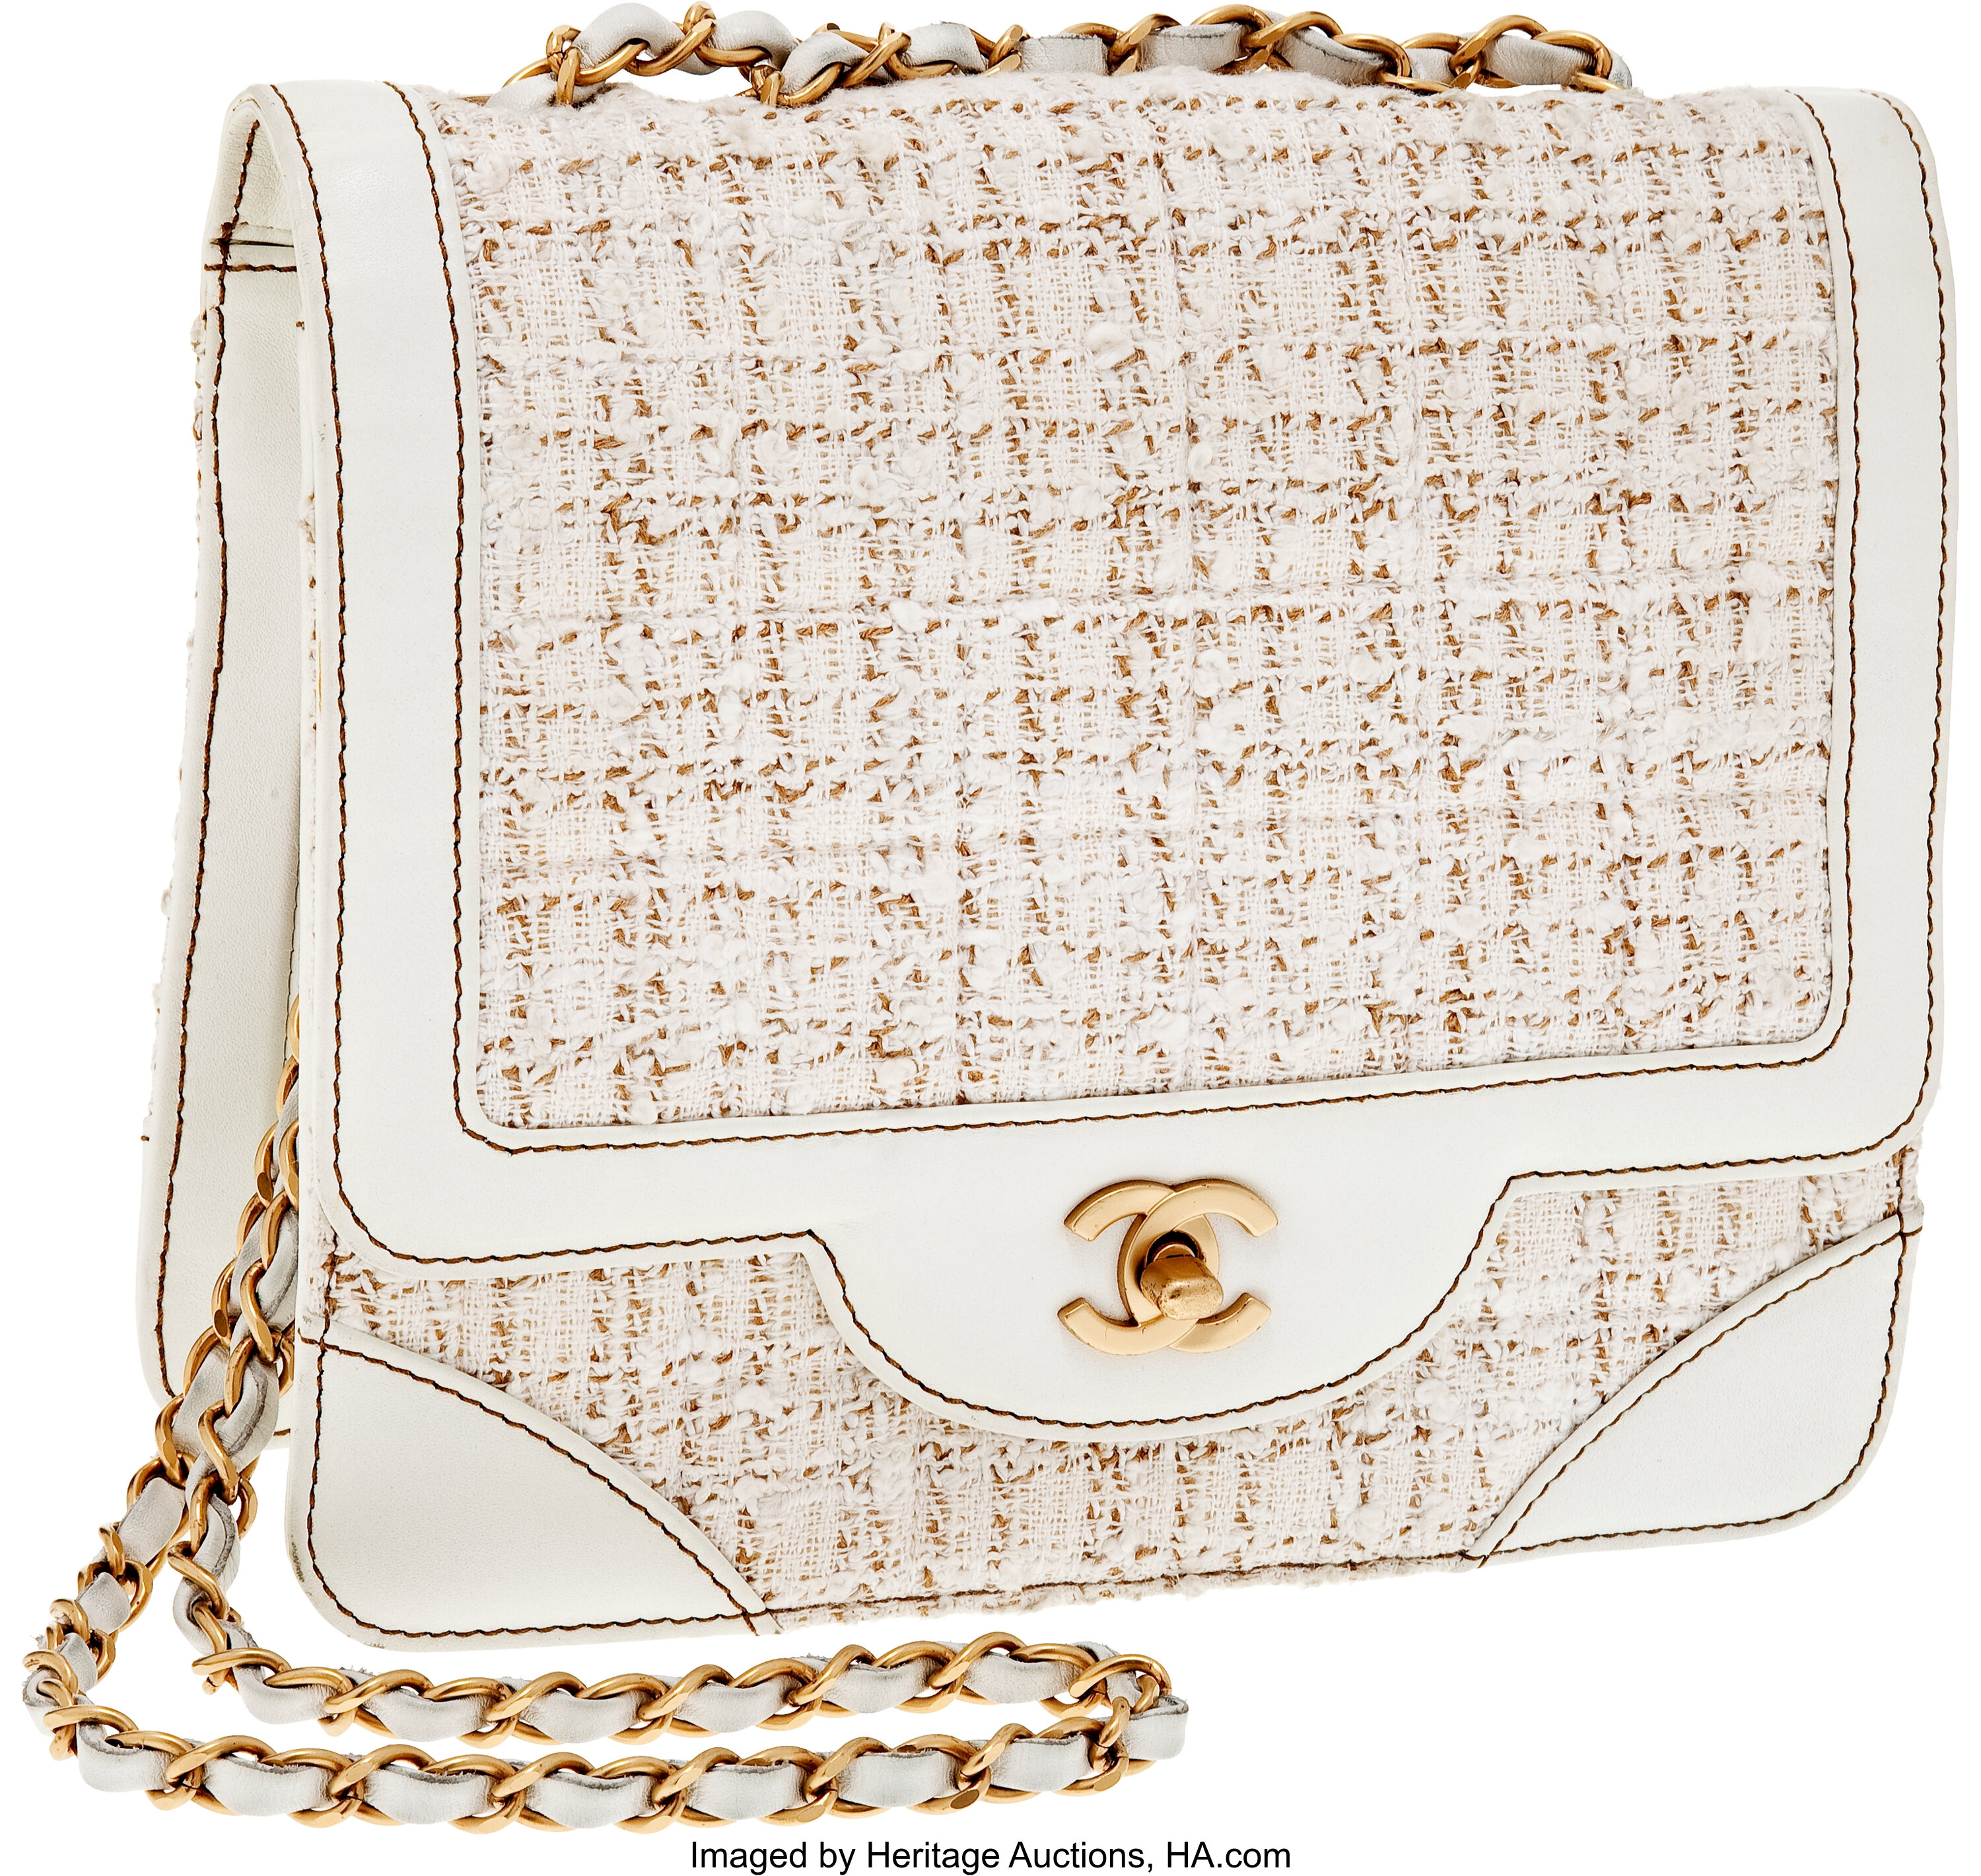 Chanel Black and White Tweed Small Flap Bag Chanel | The Luxury Closet